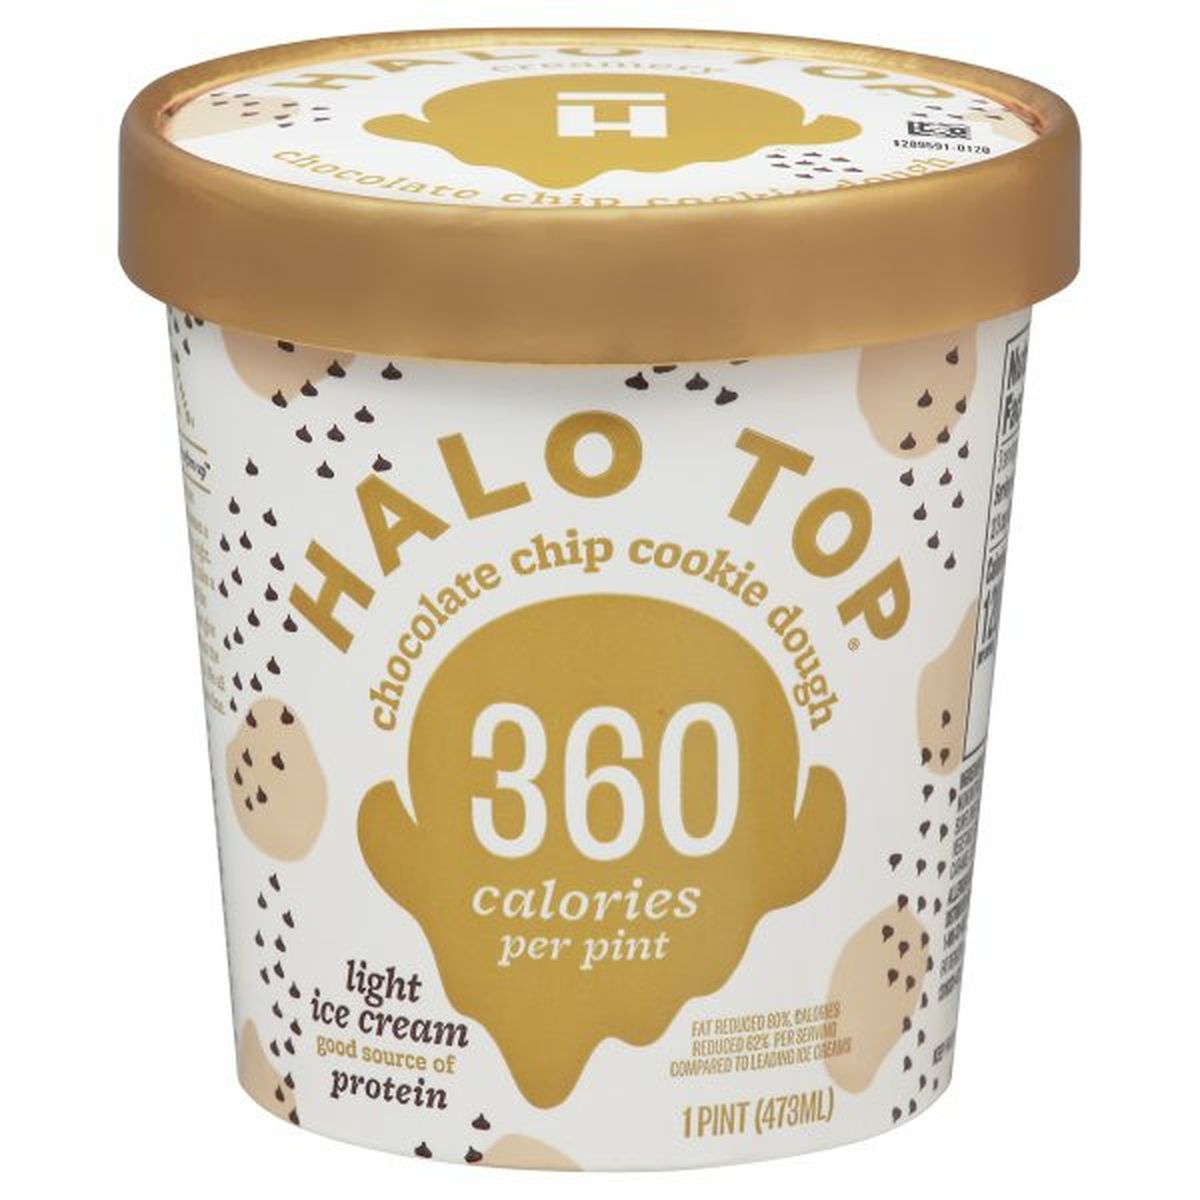 Calories in Halo Top Ice Cream, Light, Chocolate Chip Cookie Dough